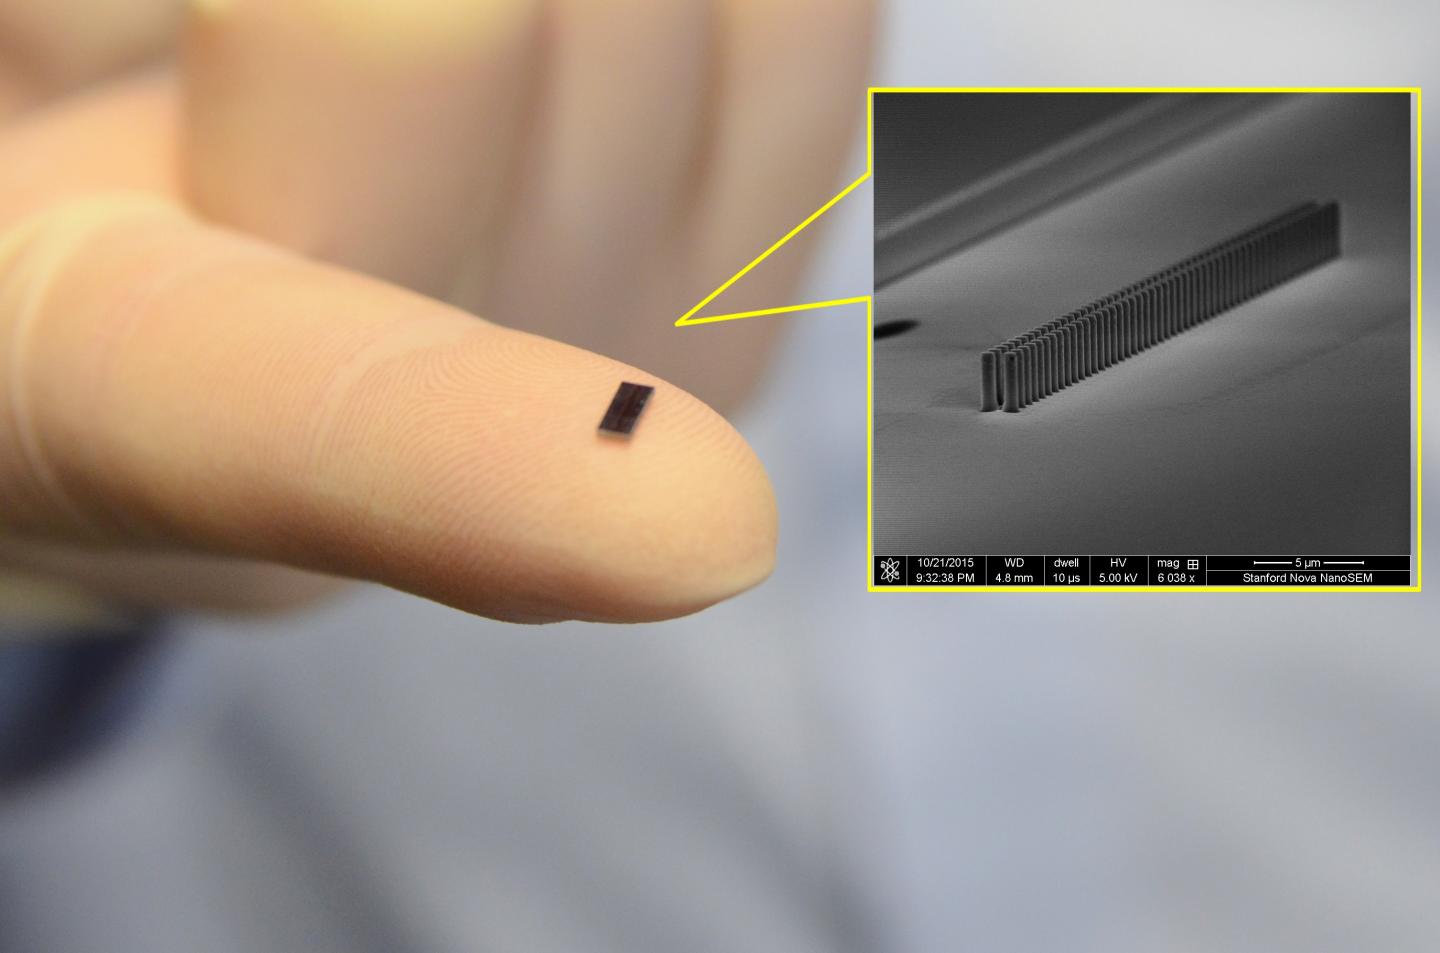 Accelerator Chip on the Tip of a Finger, and An Electron Microscope Image of the Chip